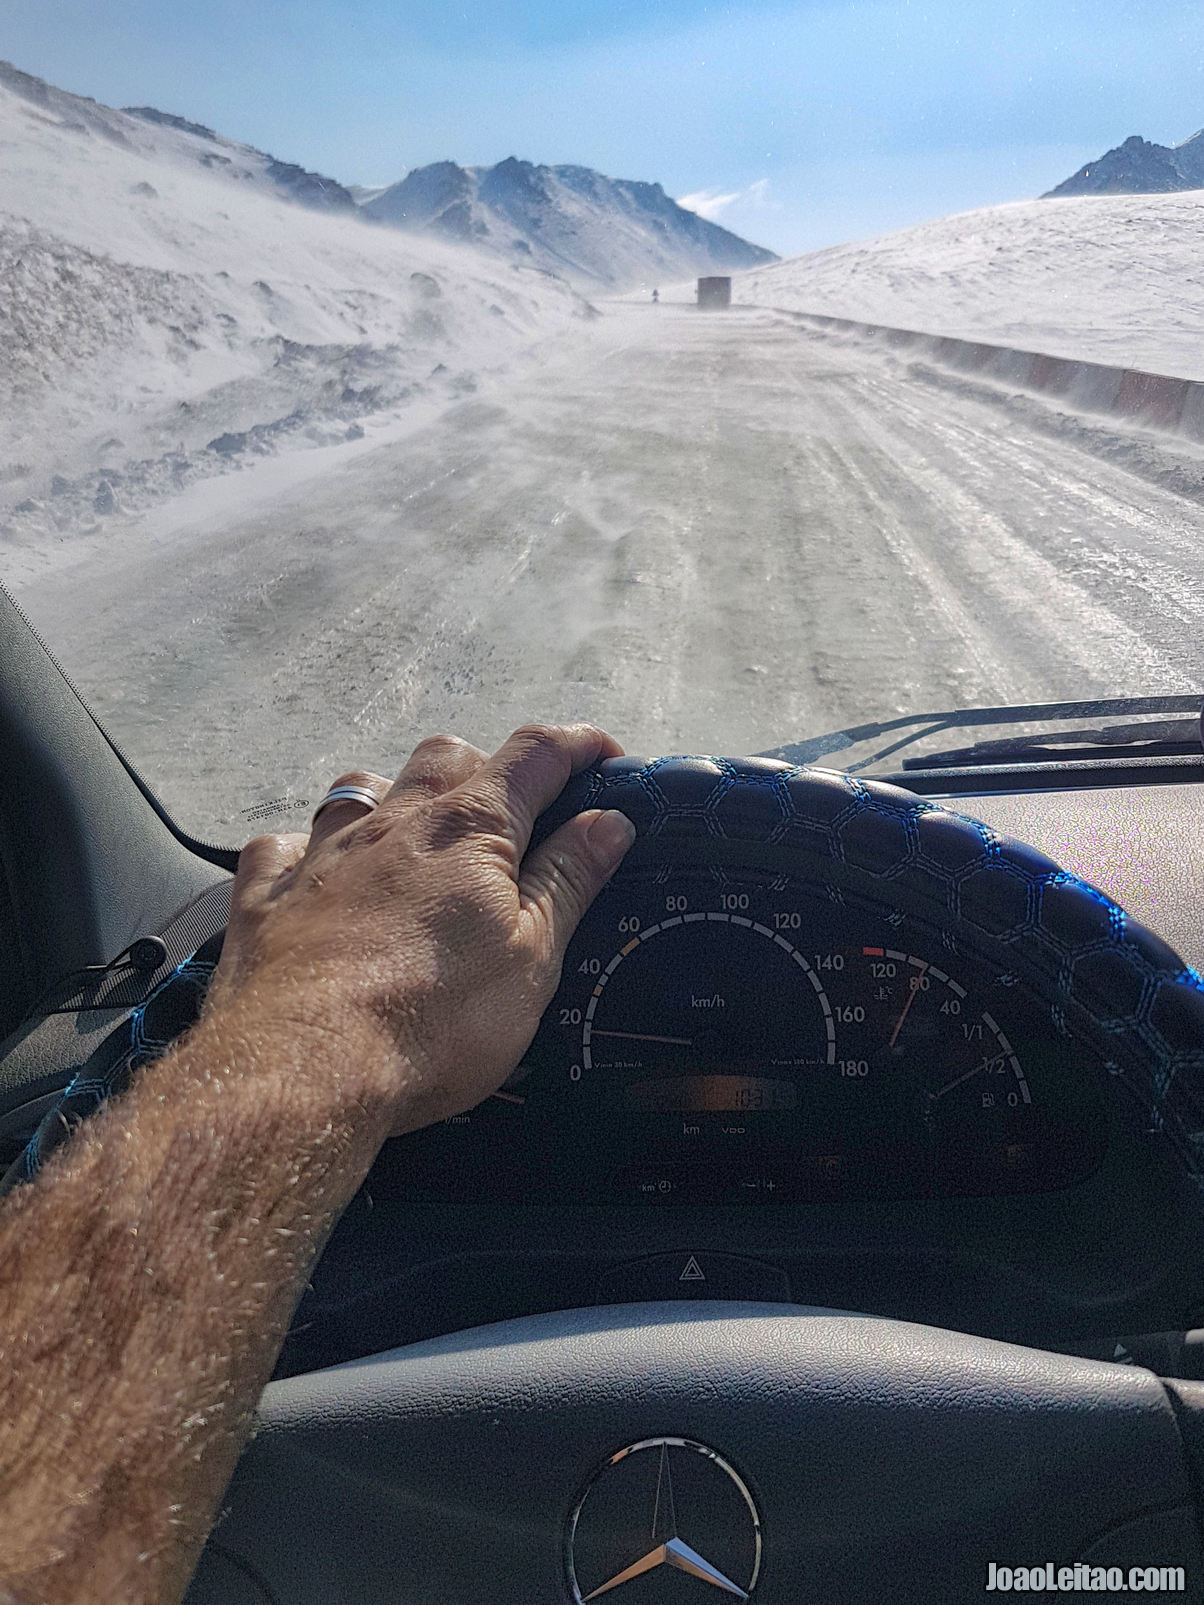 Ice on the road